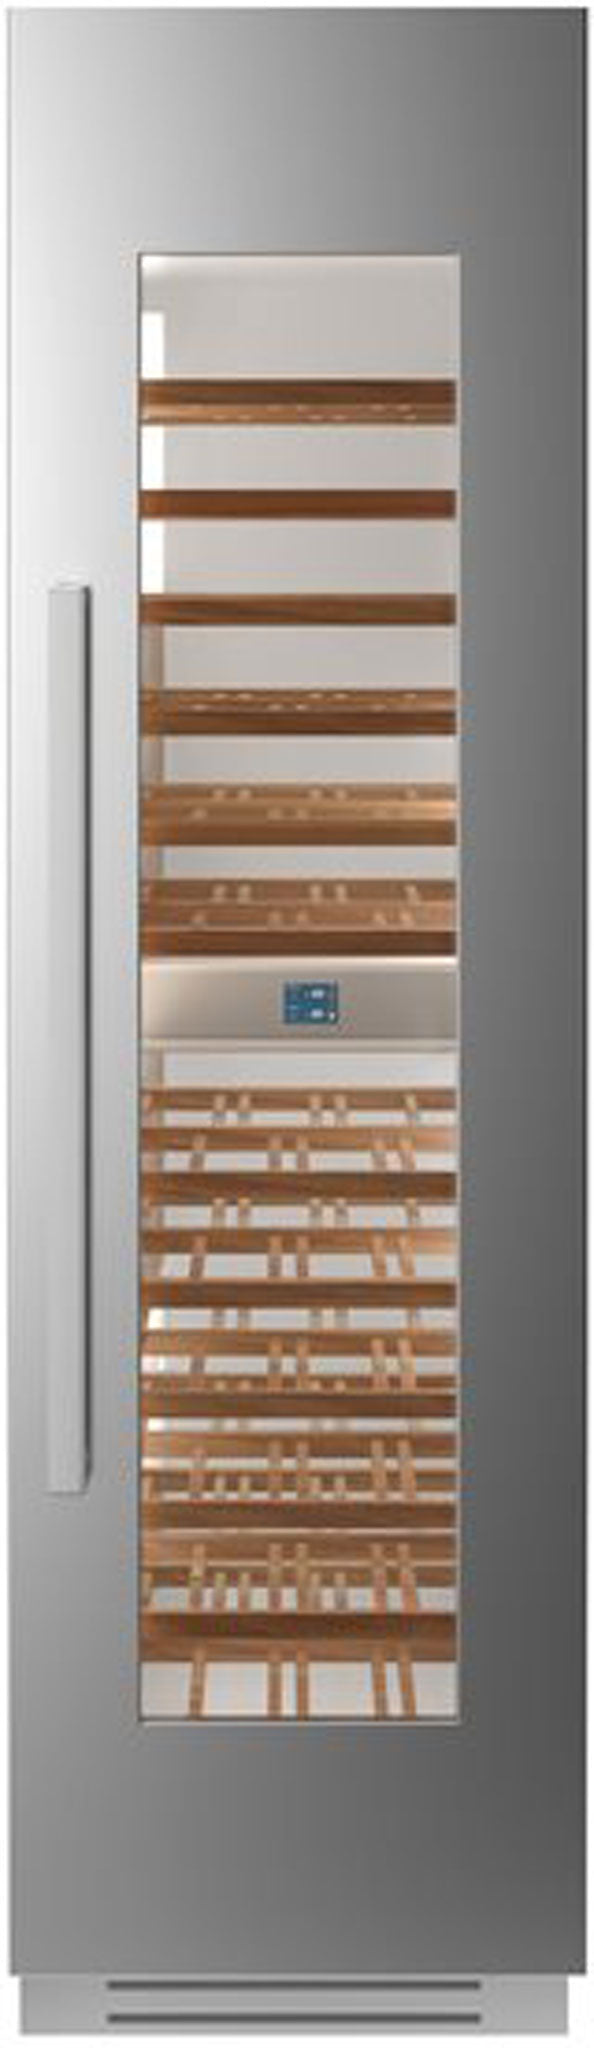 BERTAZZONI WC605BLX2T 60cm 2-Zone Free Standing Wine Cooler LH Hinge in Stainless Steel and anti-UV Glass